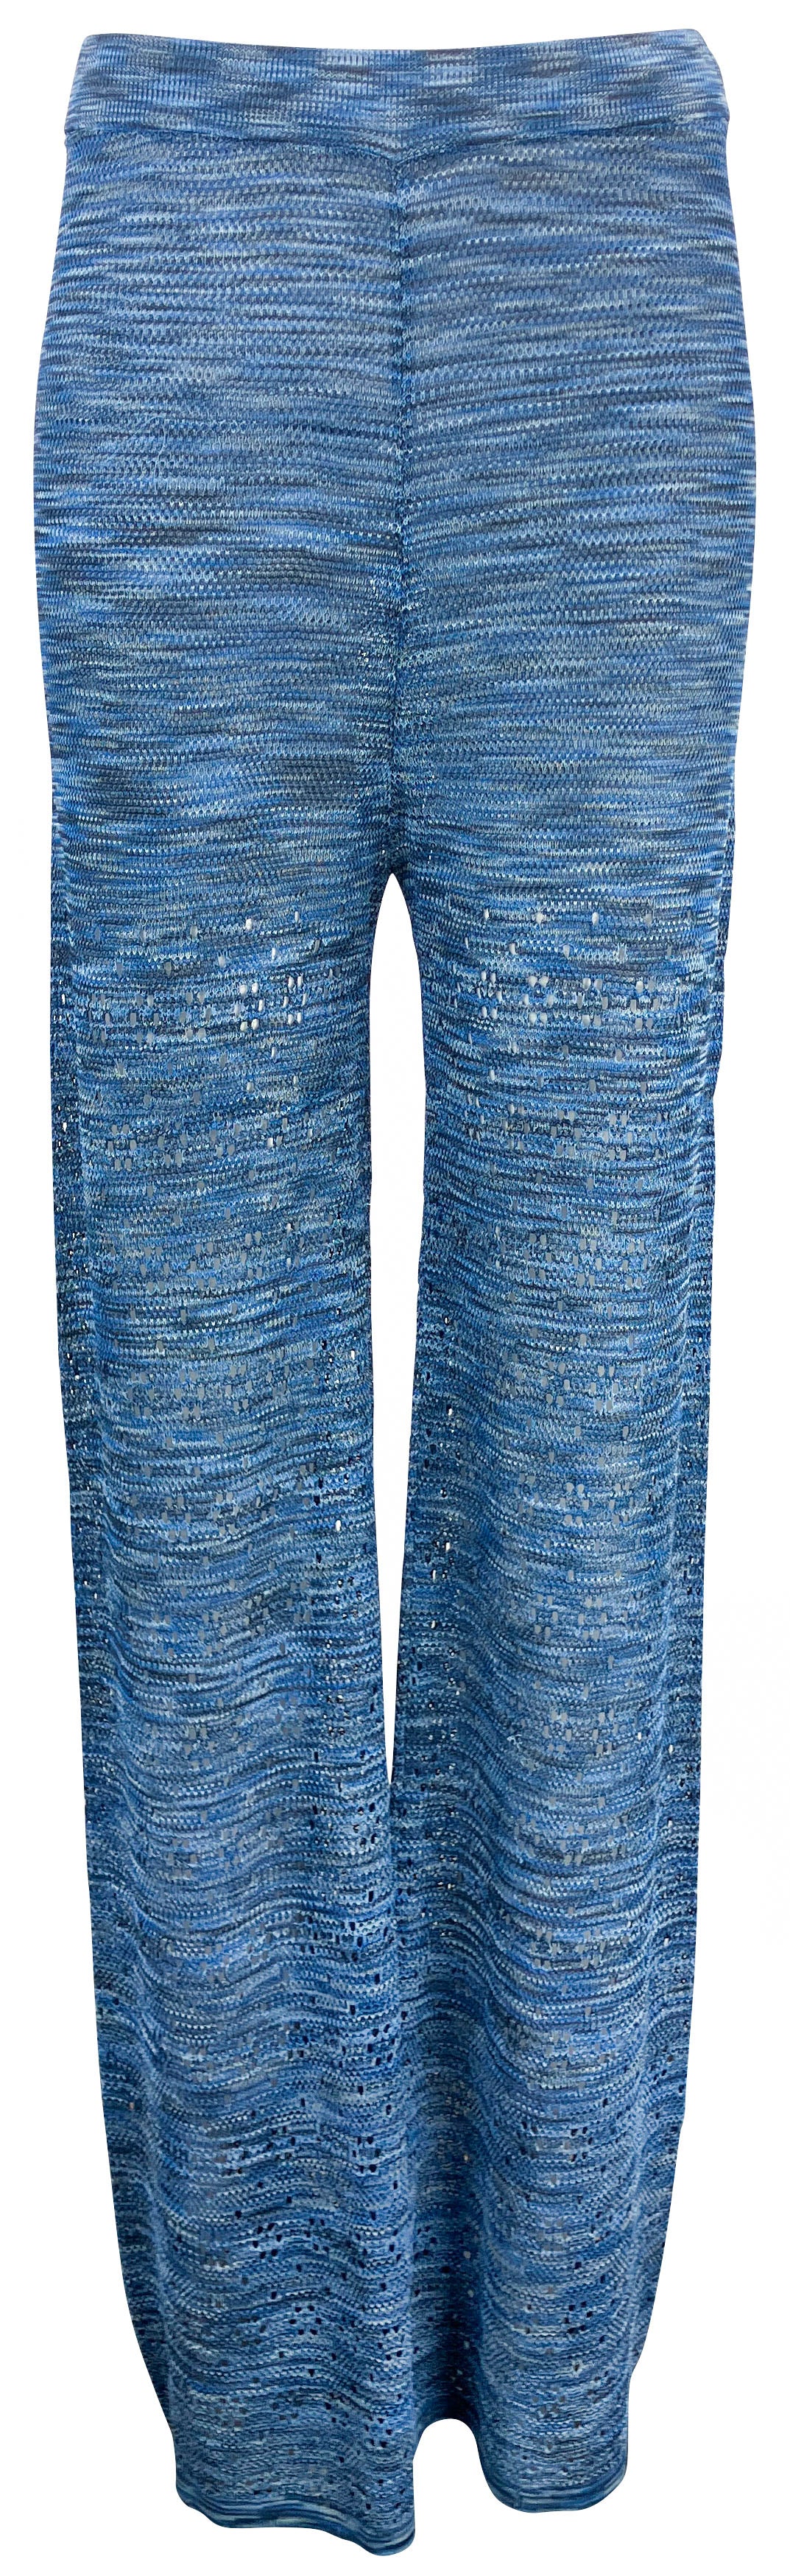 Ciao Lucia! Space Dye Crochet Santino Pant in Wave - Discounts on Ciao Lucia! at UAL